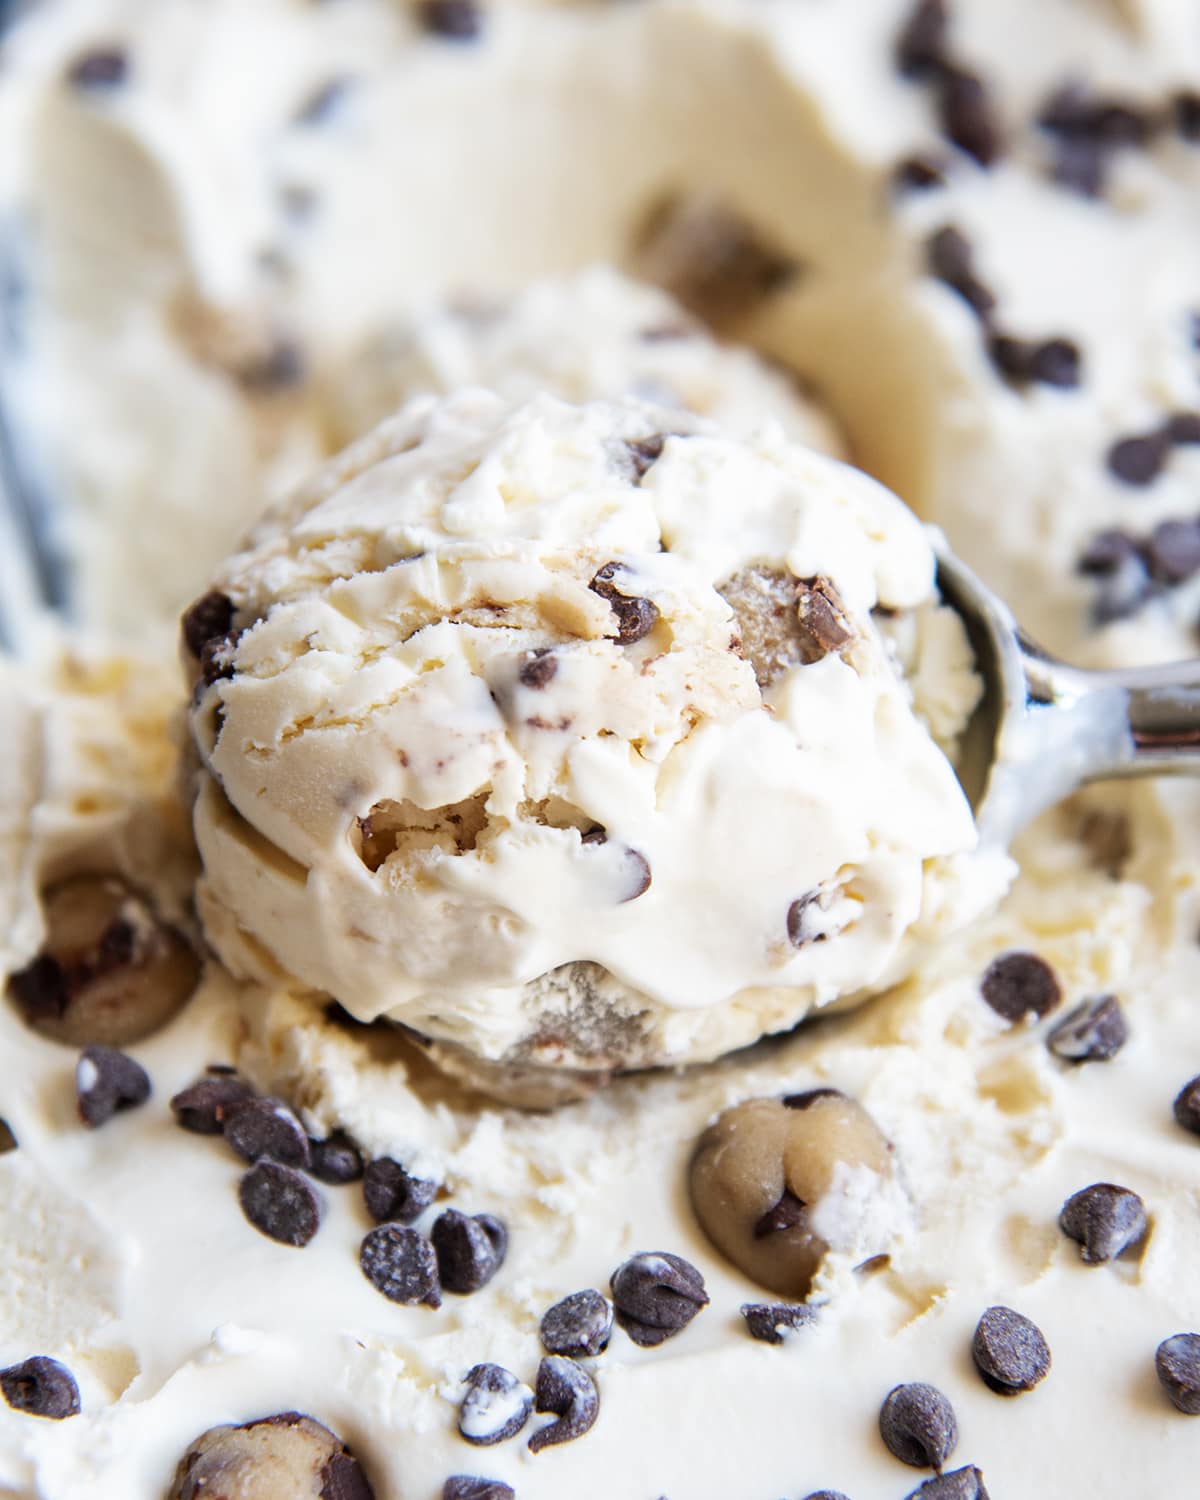 A close up of a scoop of cookie dough ice cream with chocolate chips in it.